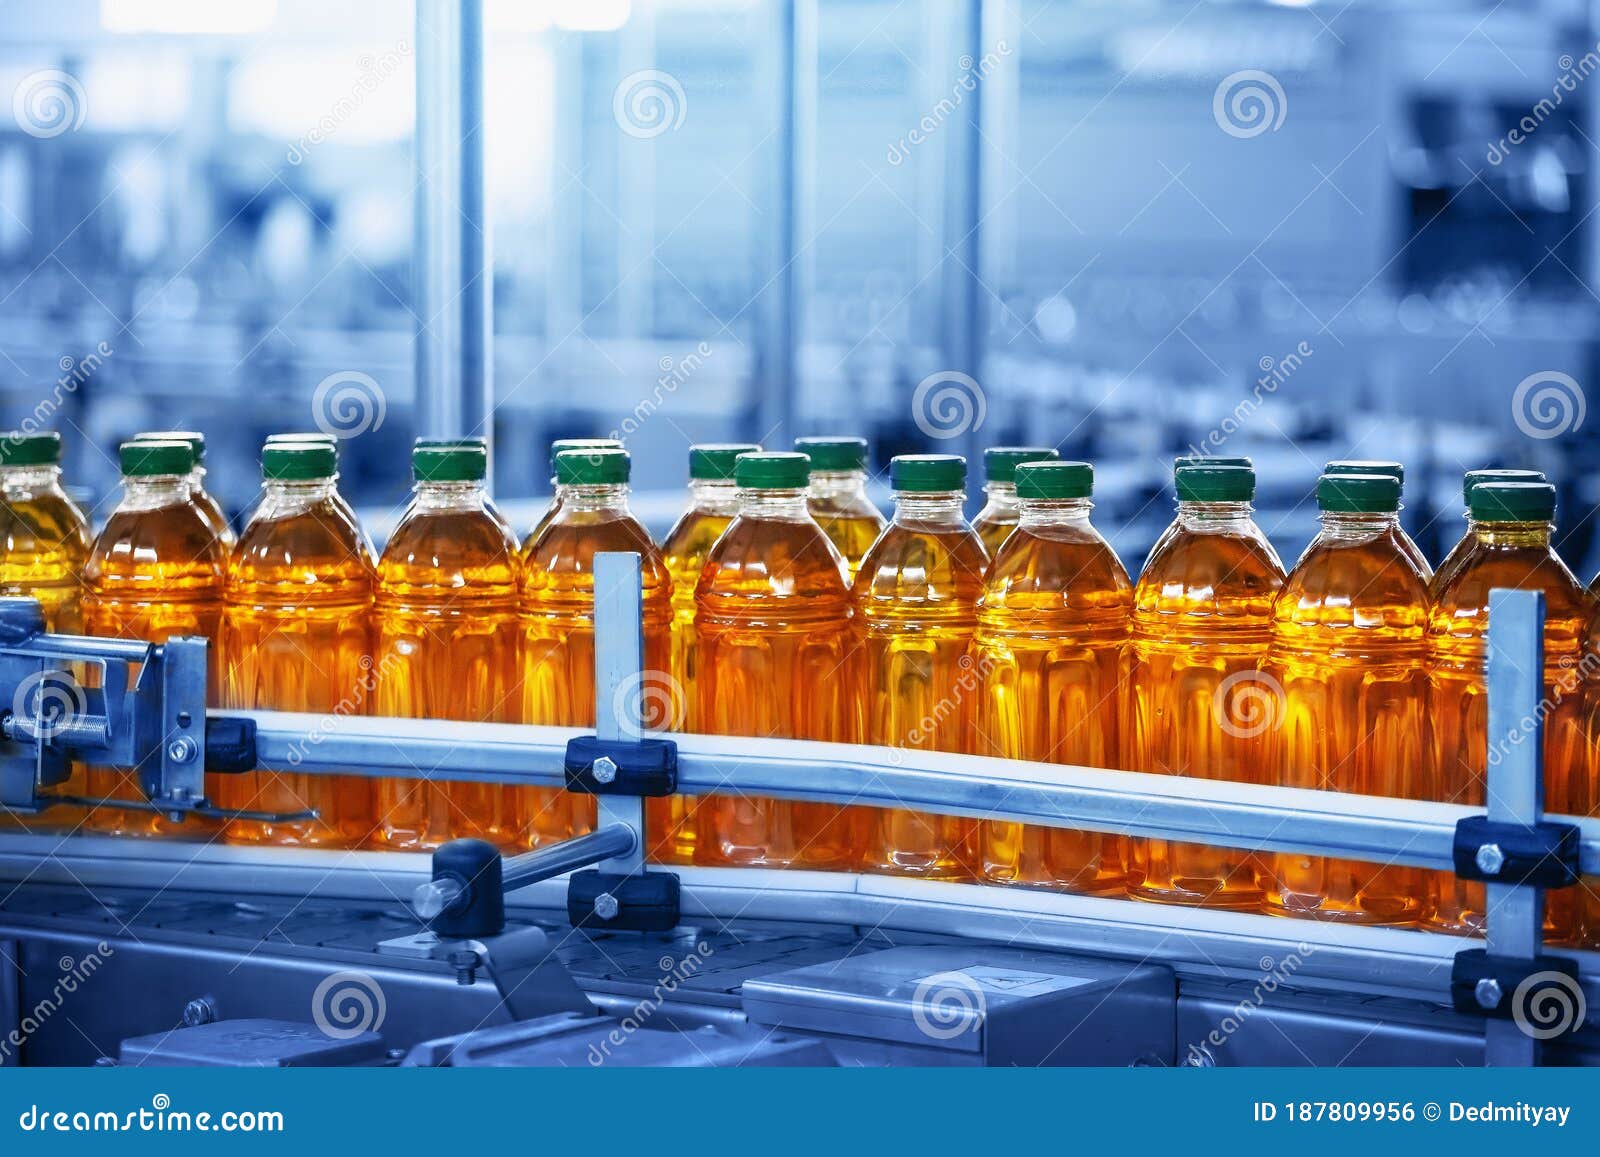 beverage factory, conveyor belt with juice in bottles, industrial interior in blue color, food and drink production line